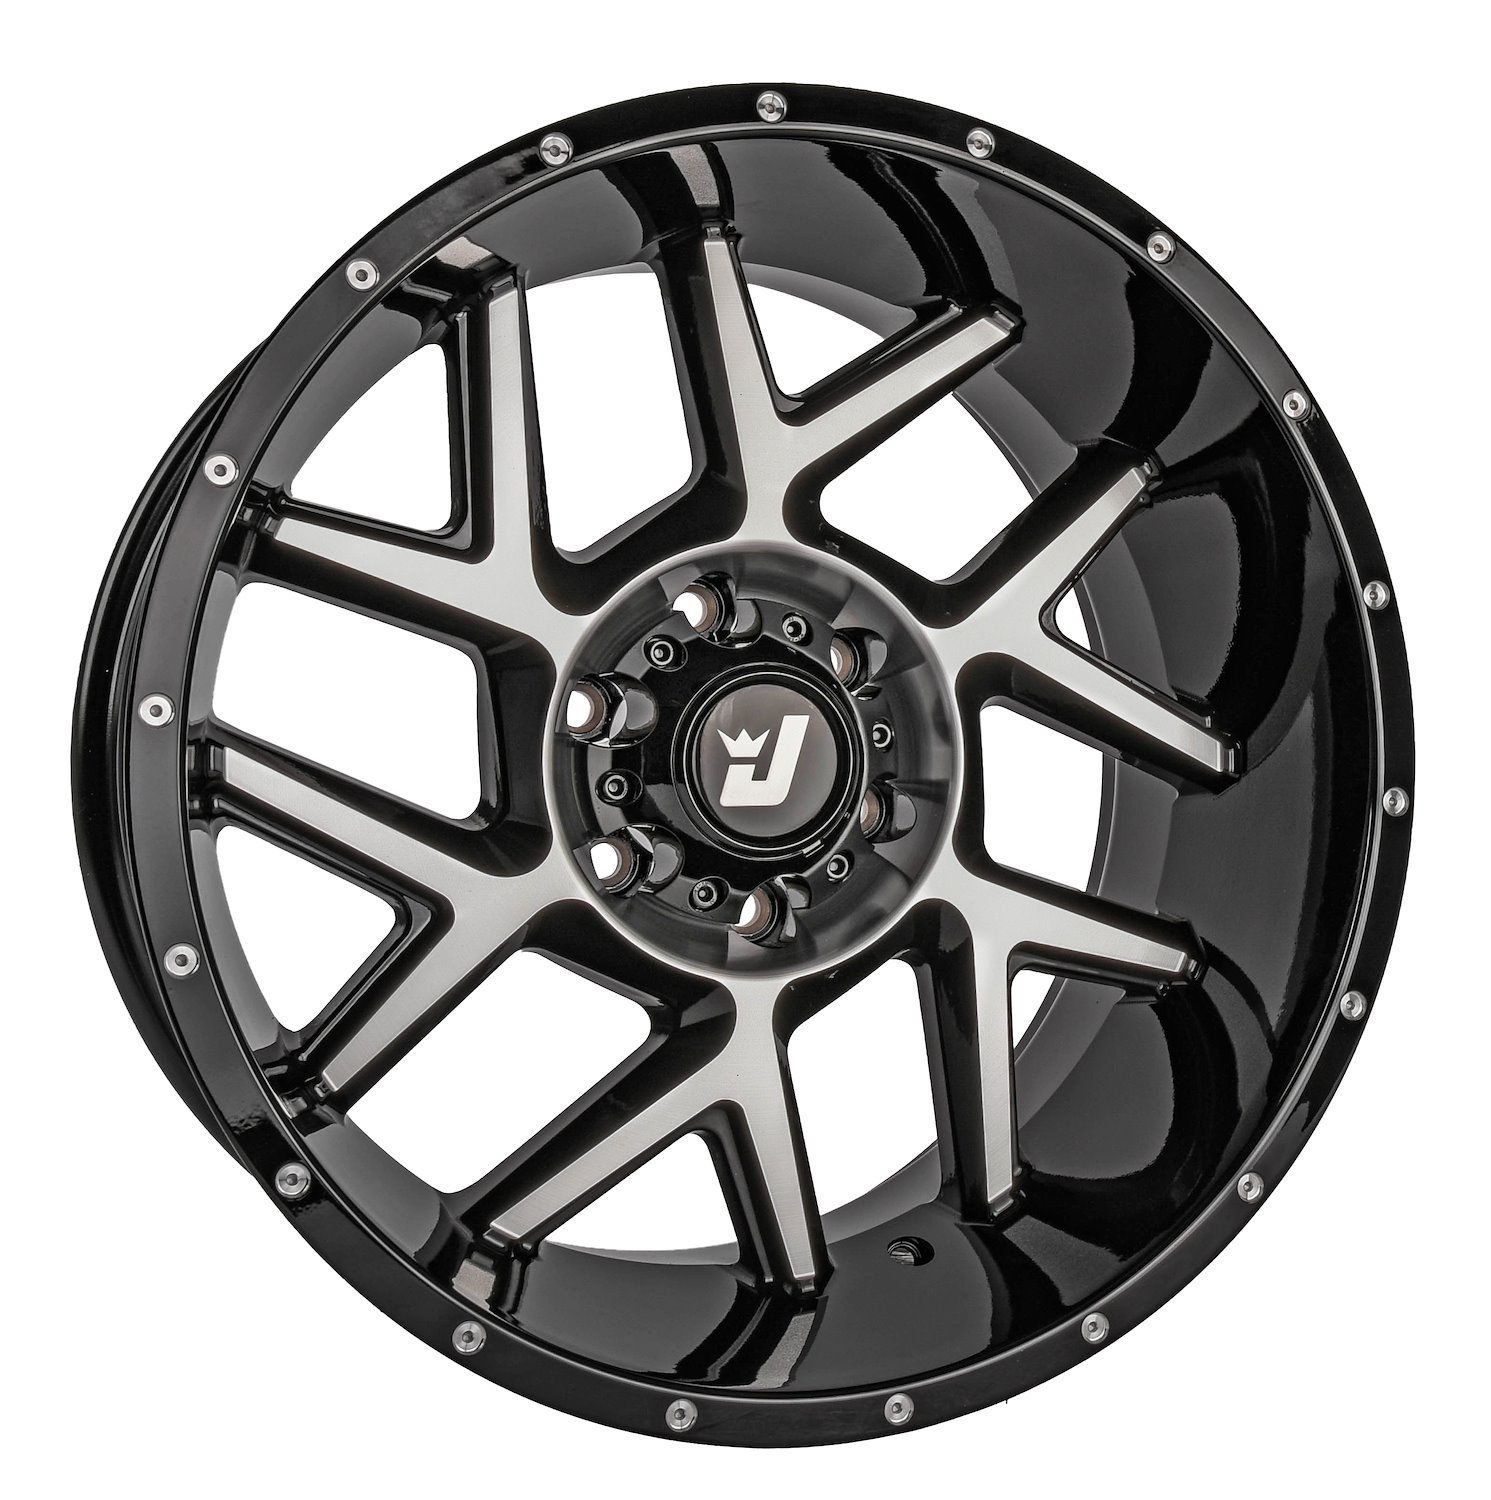 Reactor Wheel [Size: 20" x 9"] Gloss Black with Milled Spokes